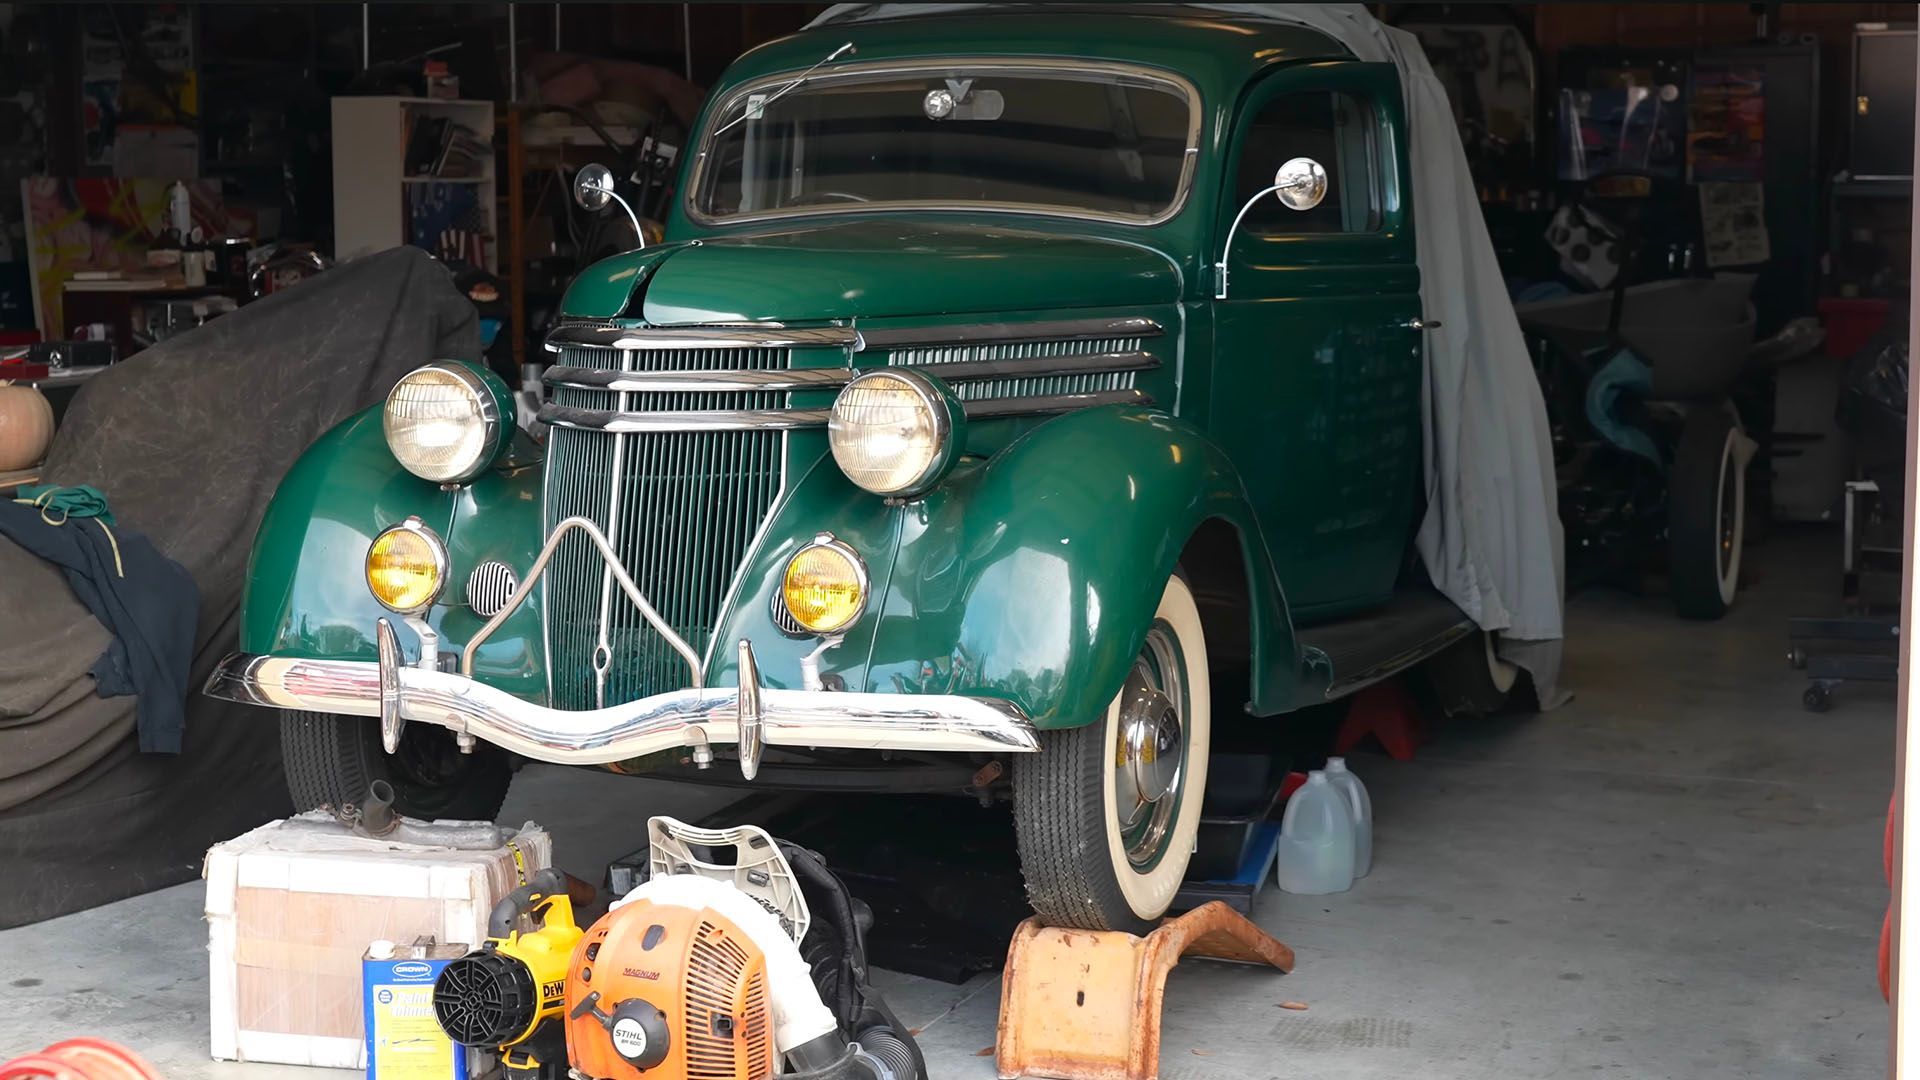 Tony Price on the Hagerty YouTube Channel, showing us around his eclectic collection of vintage Fords